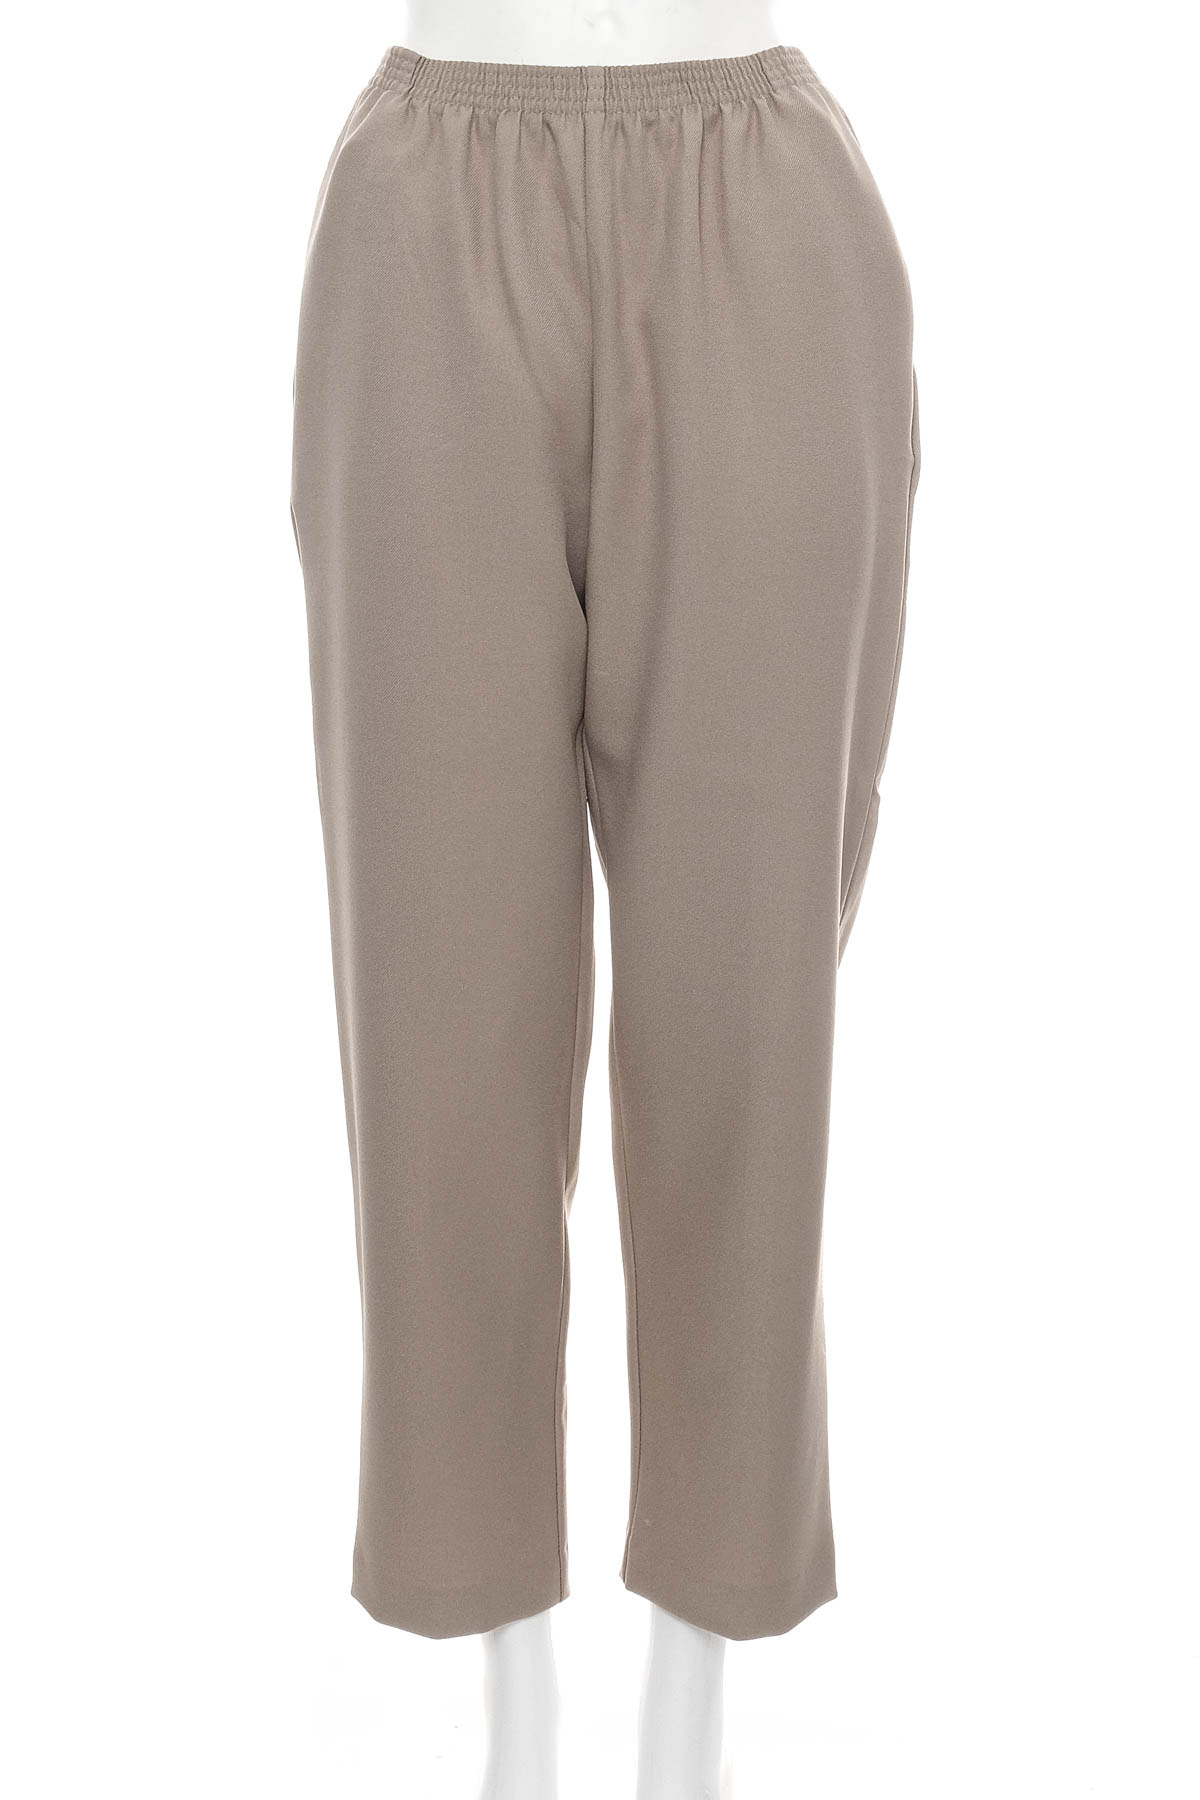 Women's trousers - Alfred dunner - 0